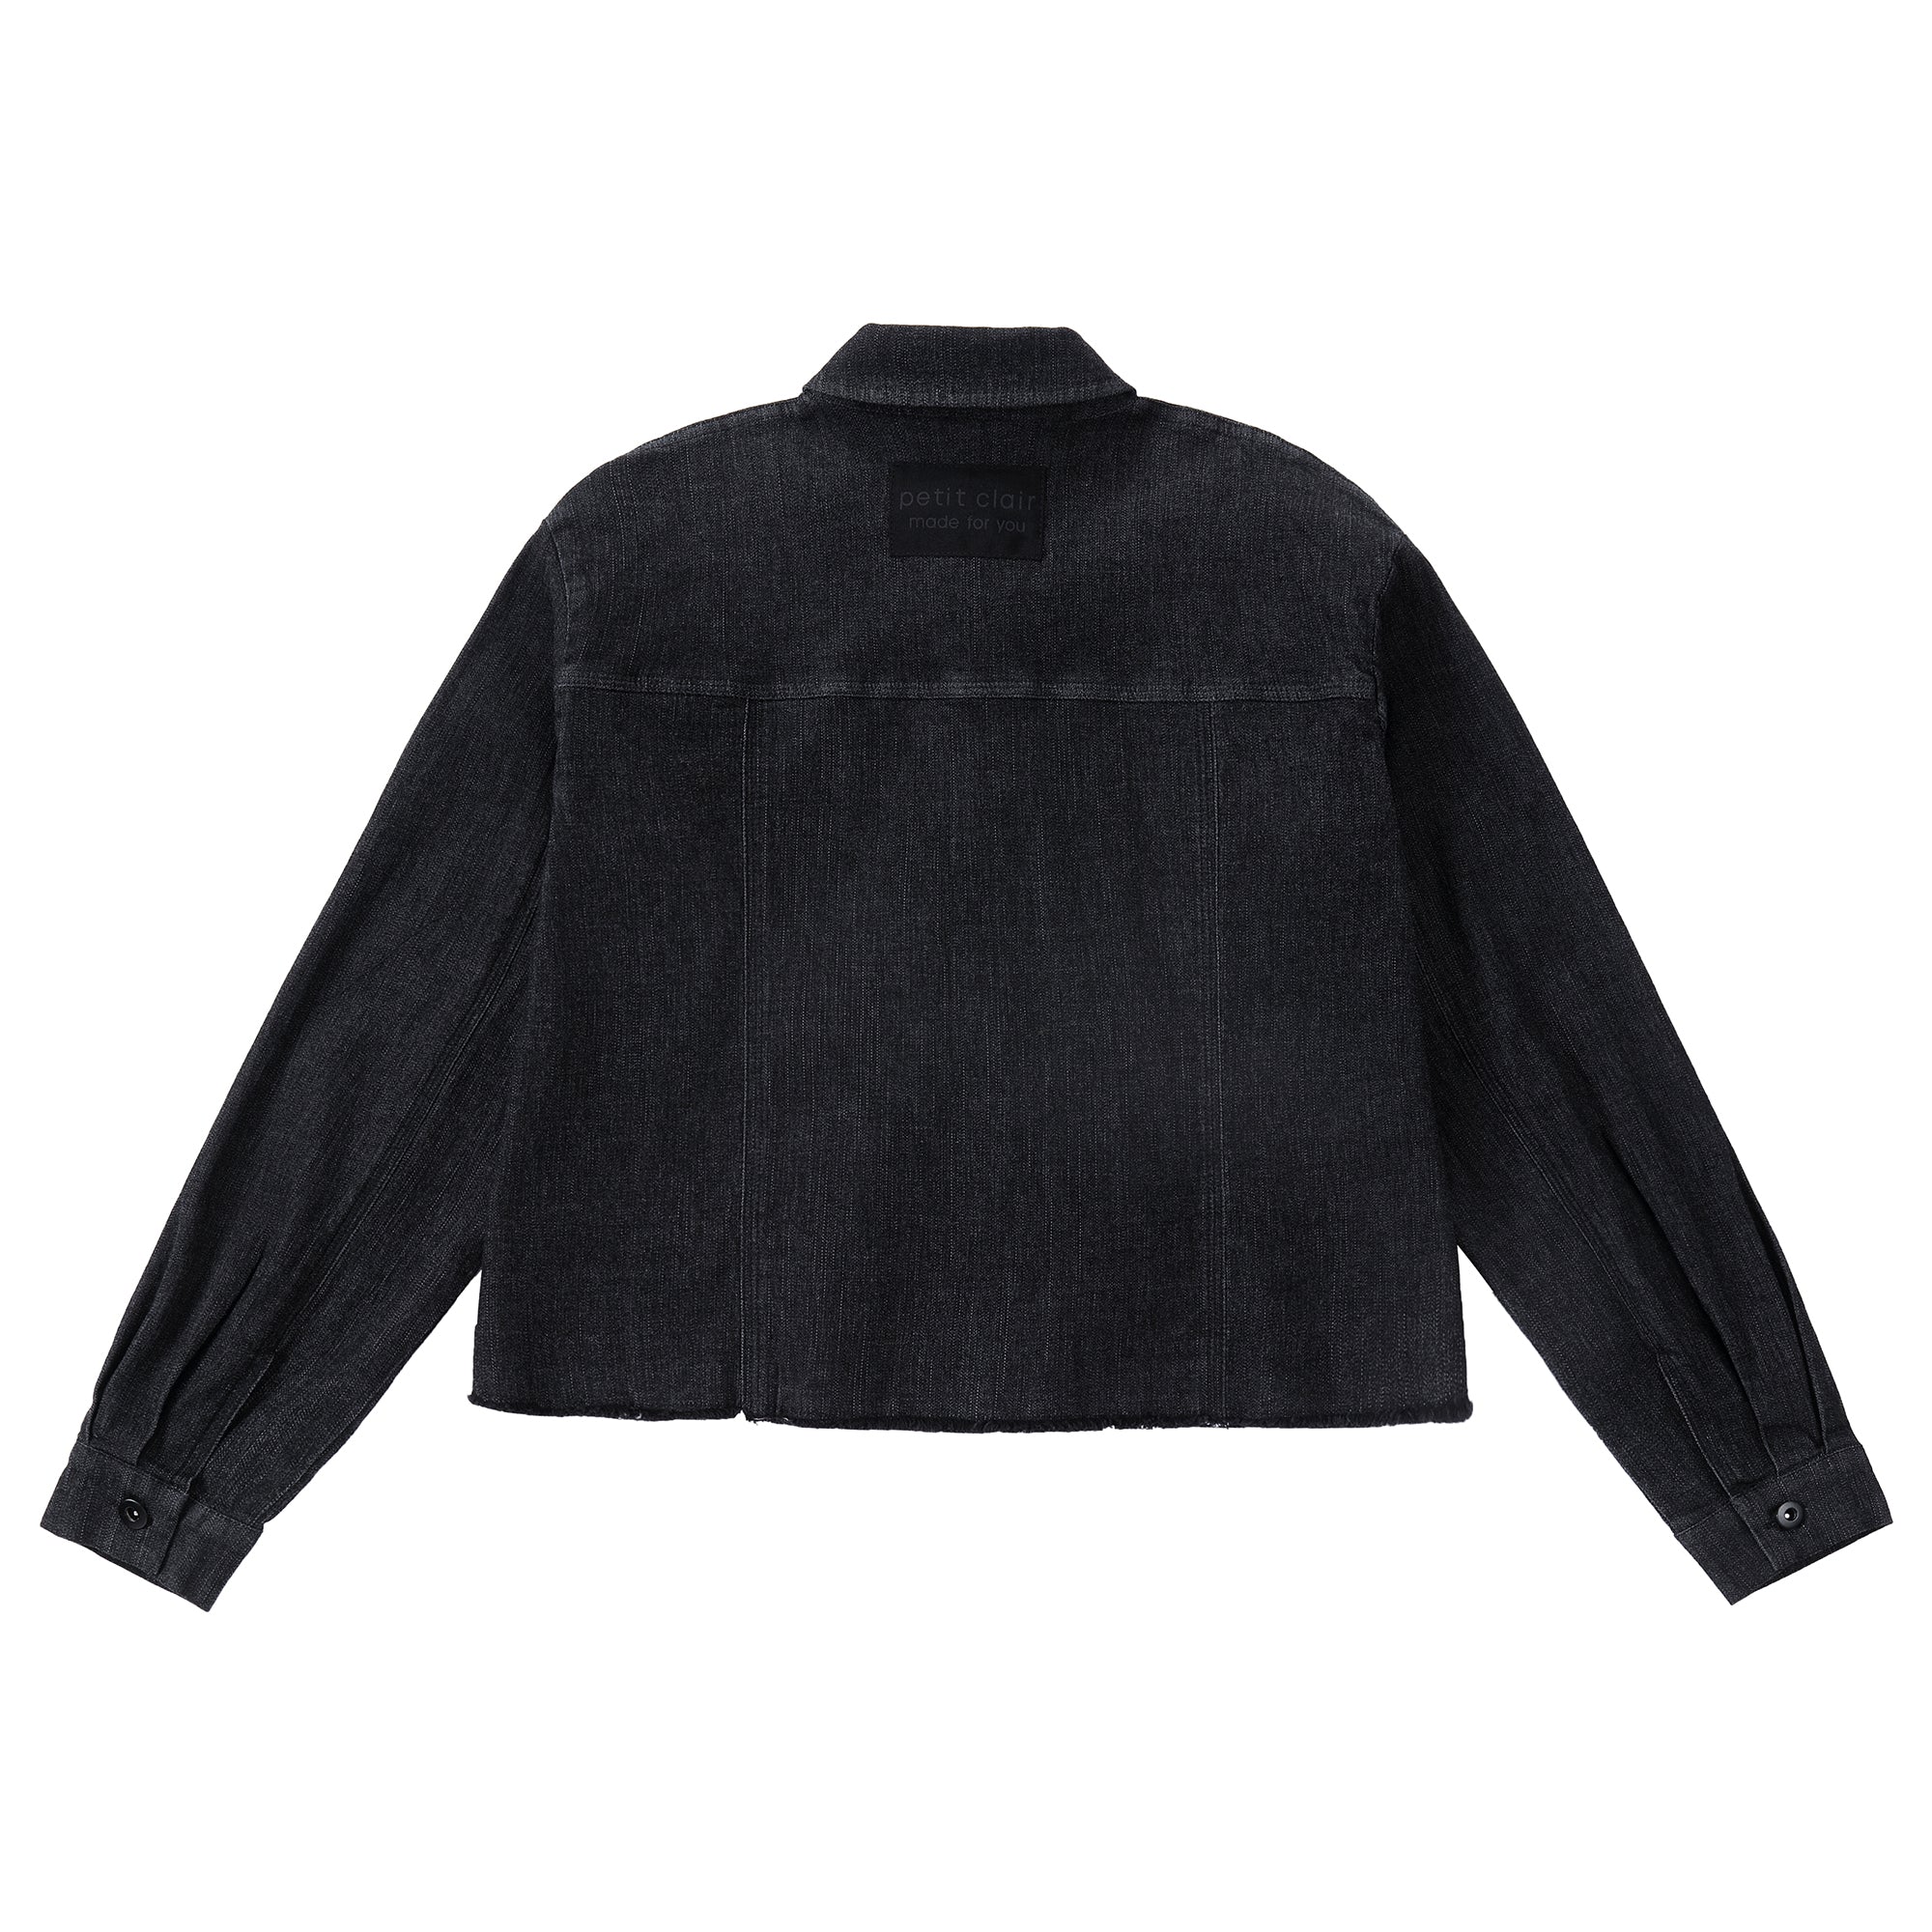 Black Denim Cropped Shirt With Button Closure